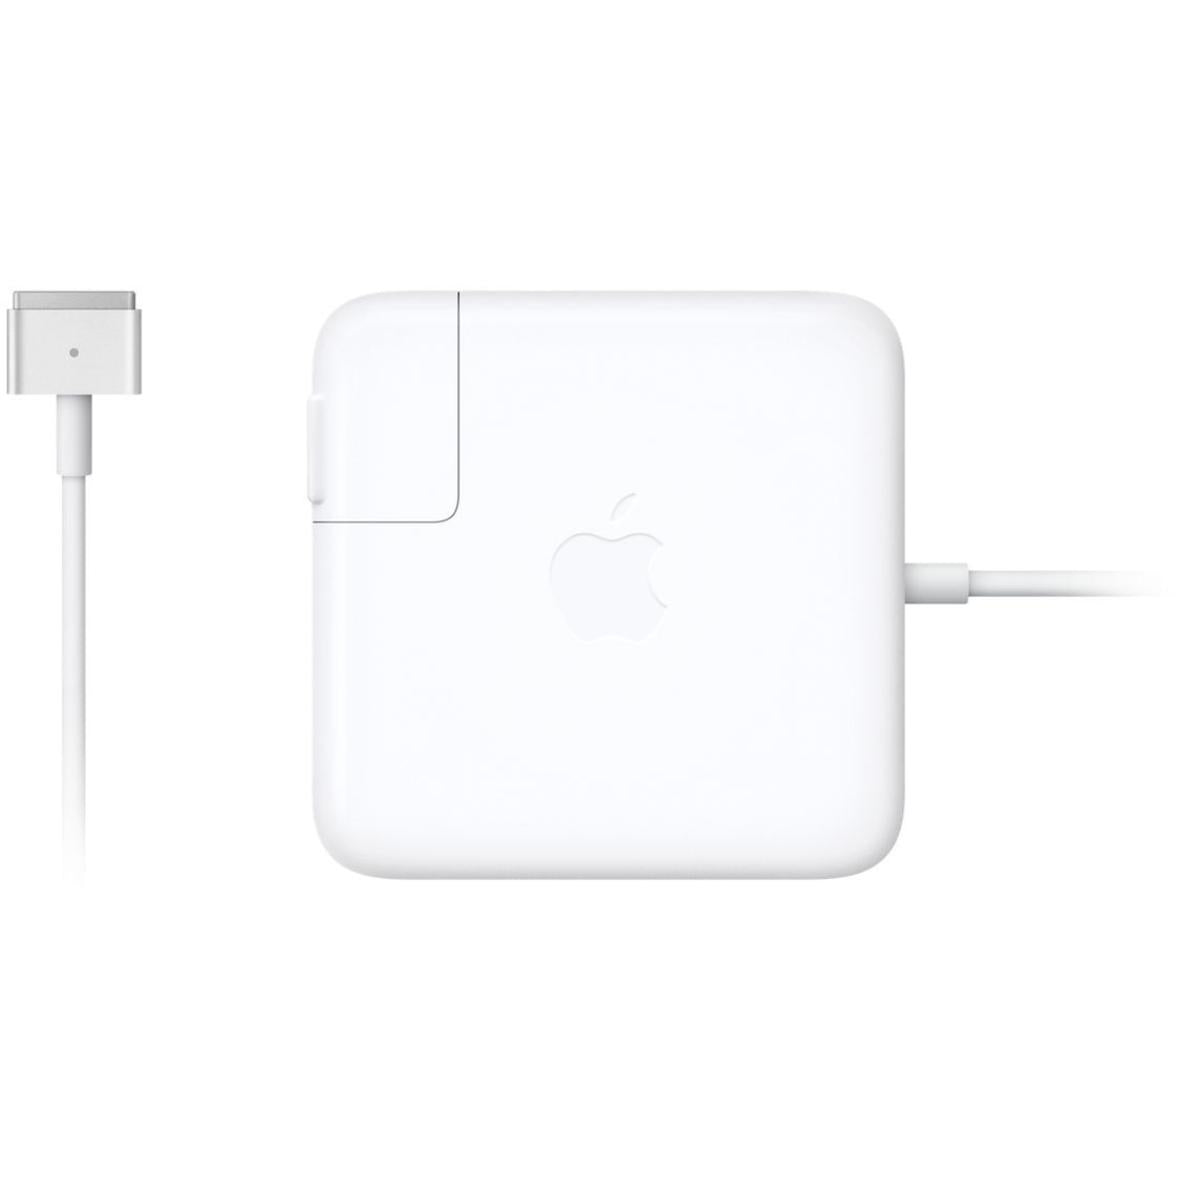 MD565B/B/ Apple 60W MagSafe 2 Power Adapter (MacBook Pro with 13-inch Retina display) / MD565Z/A White / Device / 60W